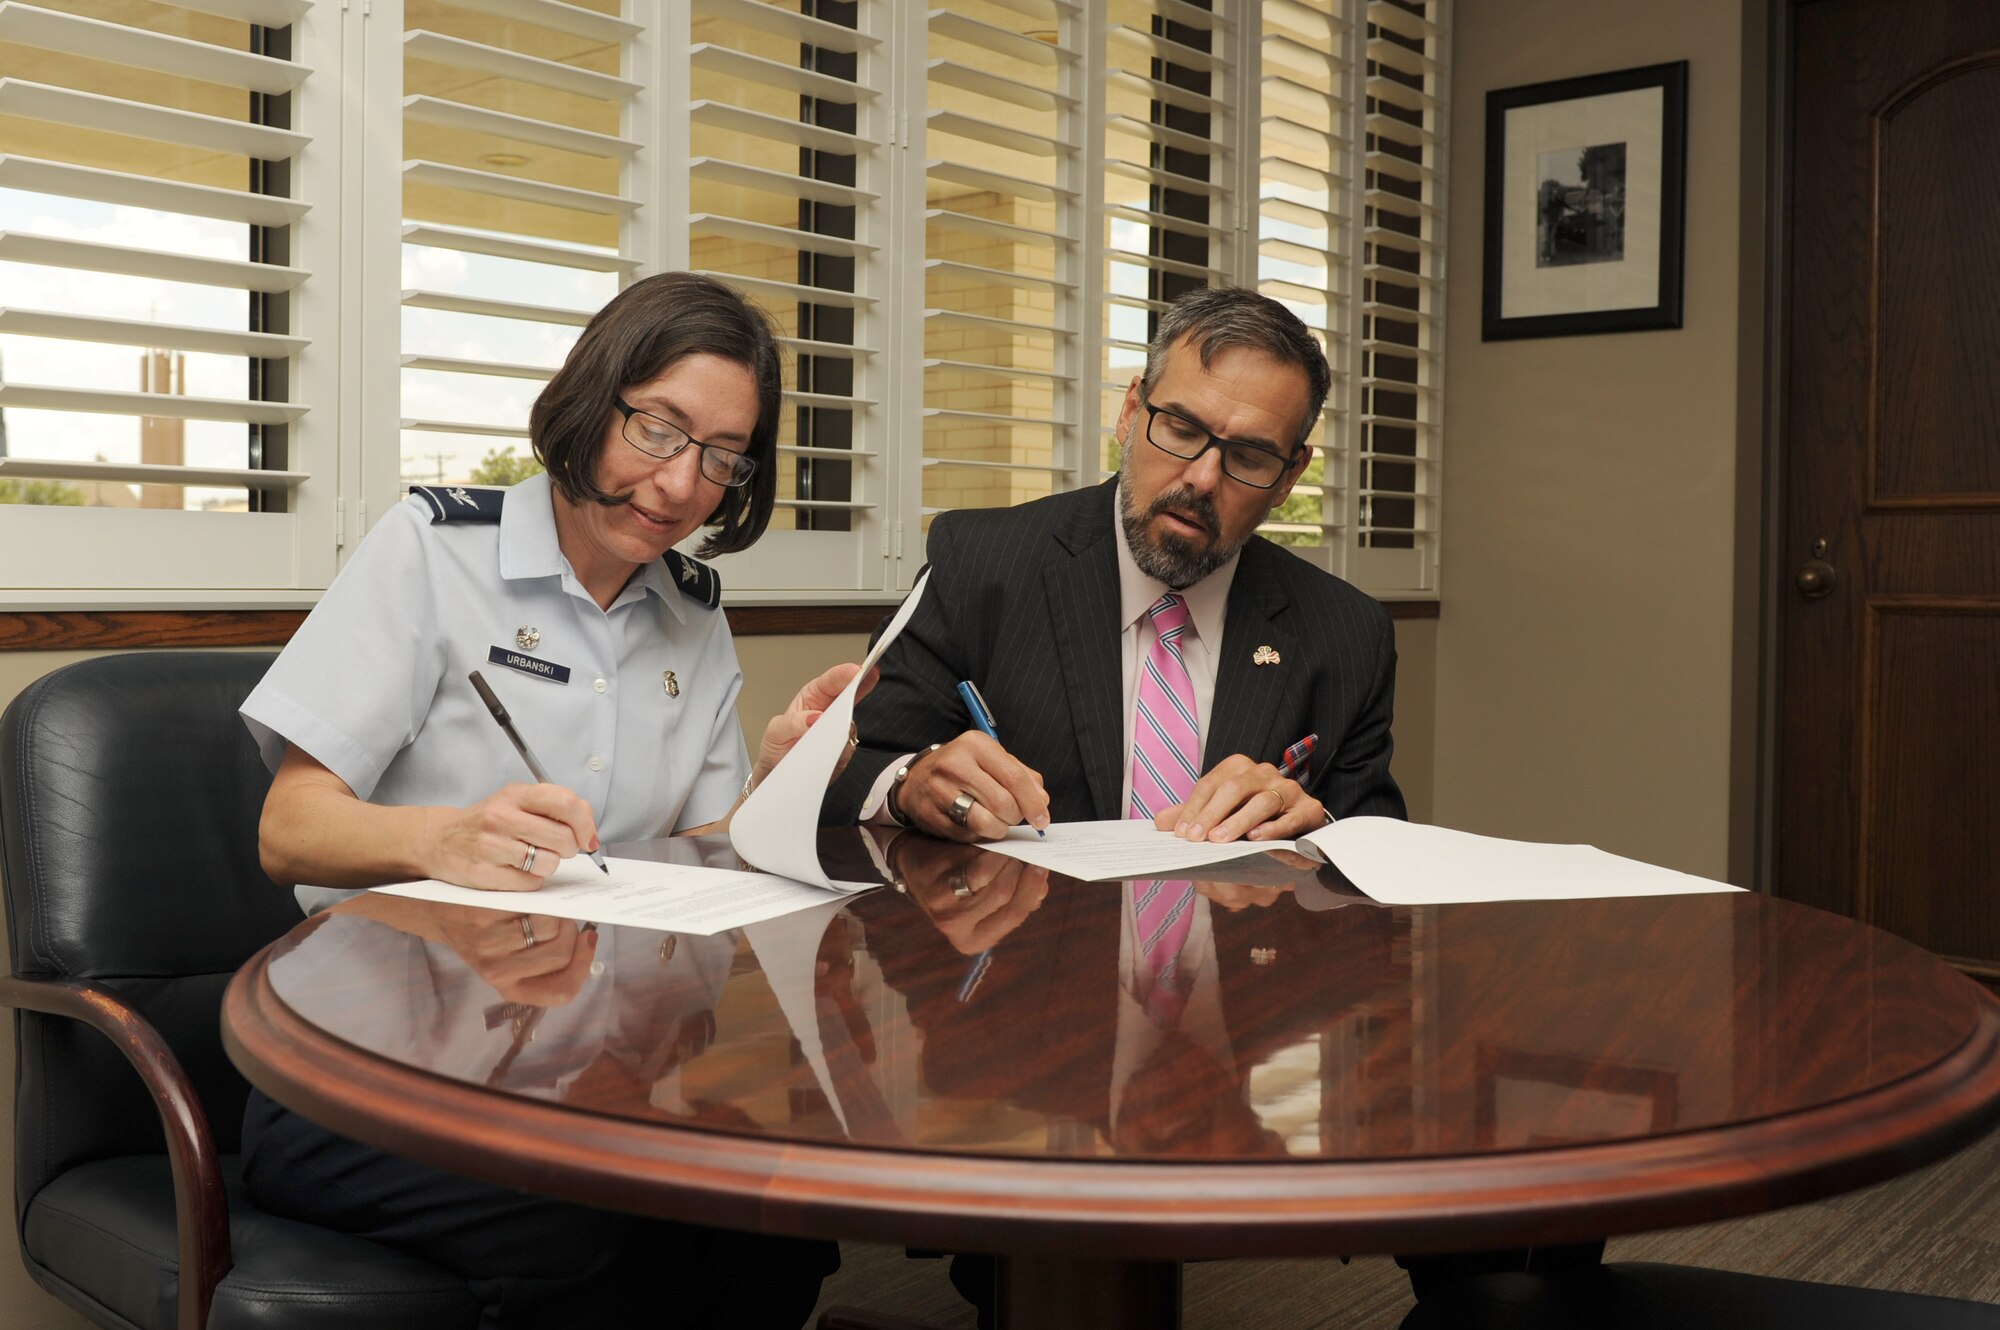 U.S. Air Force Col. Janet Urbanski, 17th Medical Group Commander, and Shane Phymell, Shannon Medical Center chief executive officer, sign a memorandum of agreement at the Shannon Medical Clinic in San Angelo, Texas, July 21, 2017. The agreement allows Goodfellow Air Force Base and Shannon medical professionals to use each other’s resources, providing higher quality training environment. (U.S. Air Force photo by Senior Airman Scott Jackson/Released)